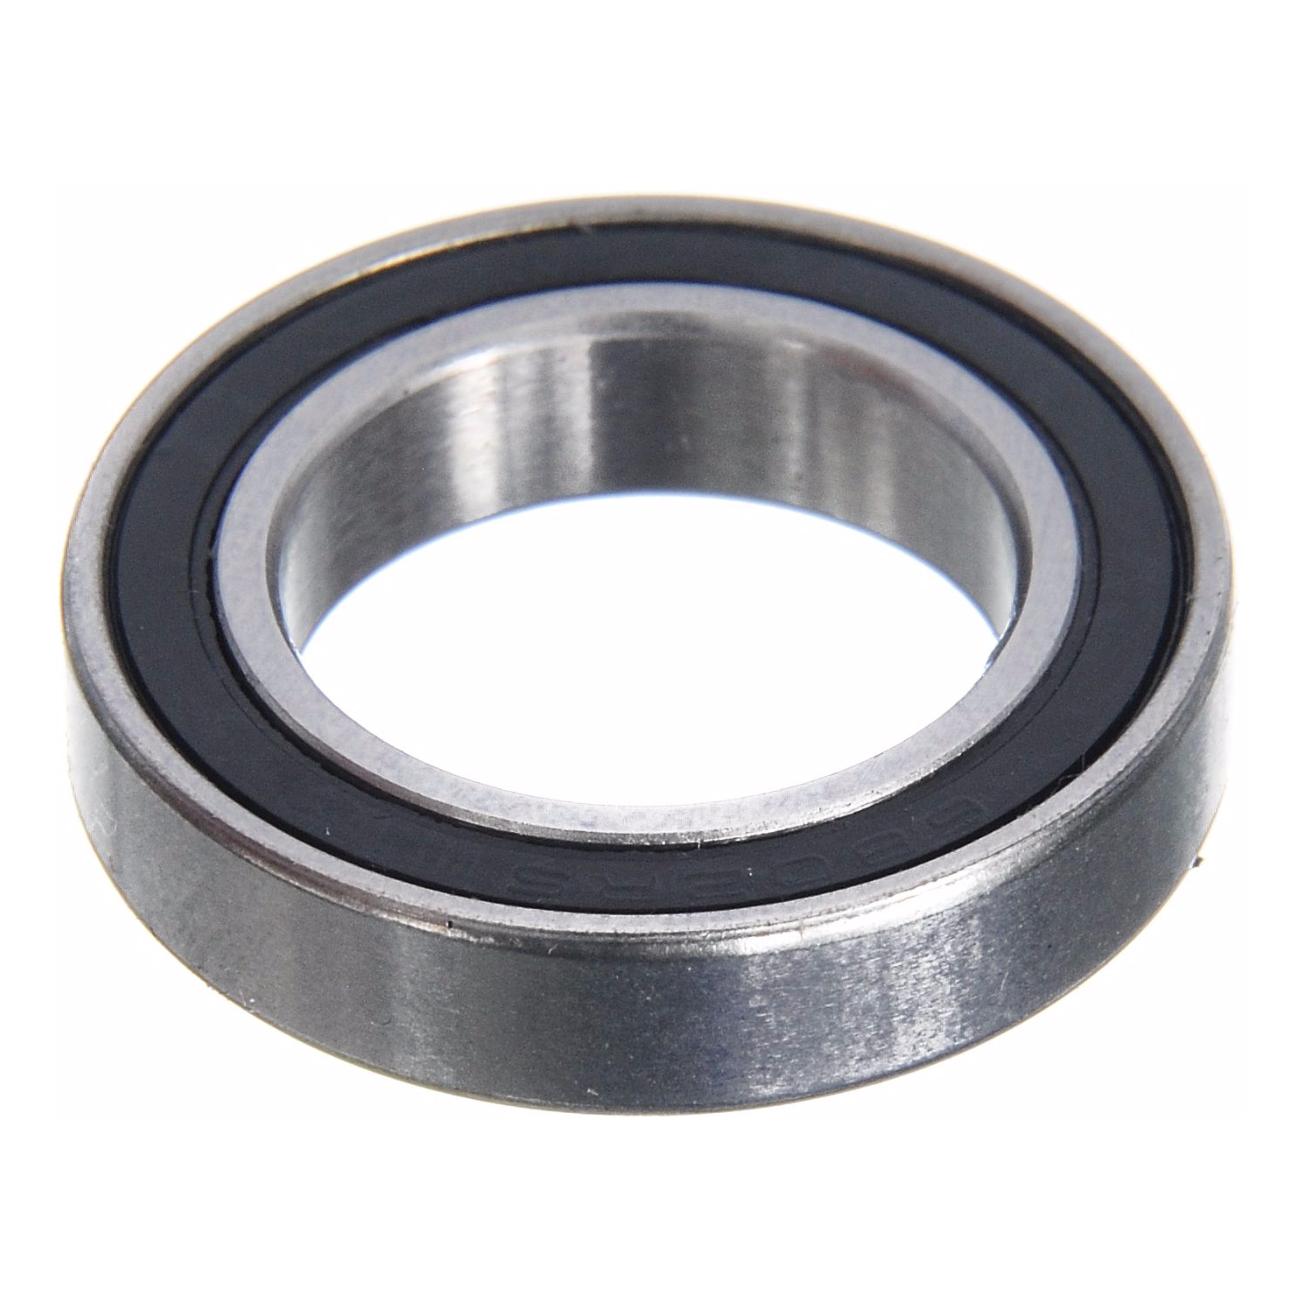 Brand-x Sealed Bearing (6804 2rs)  Silver